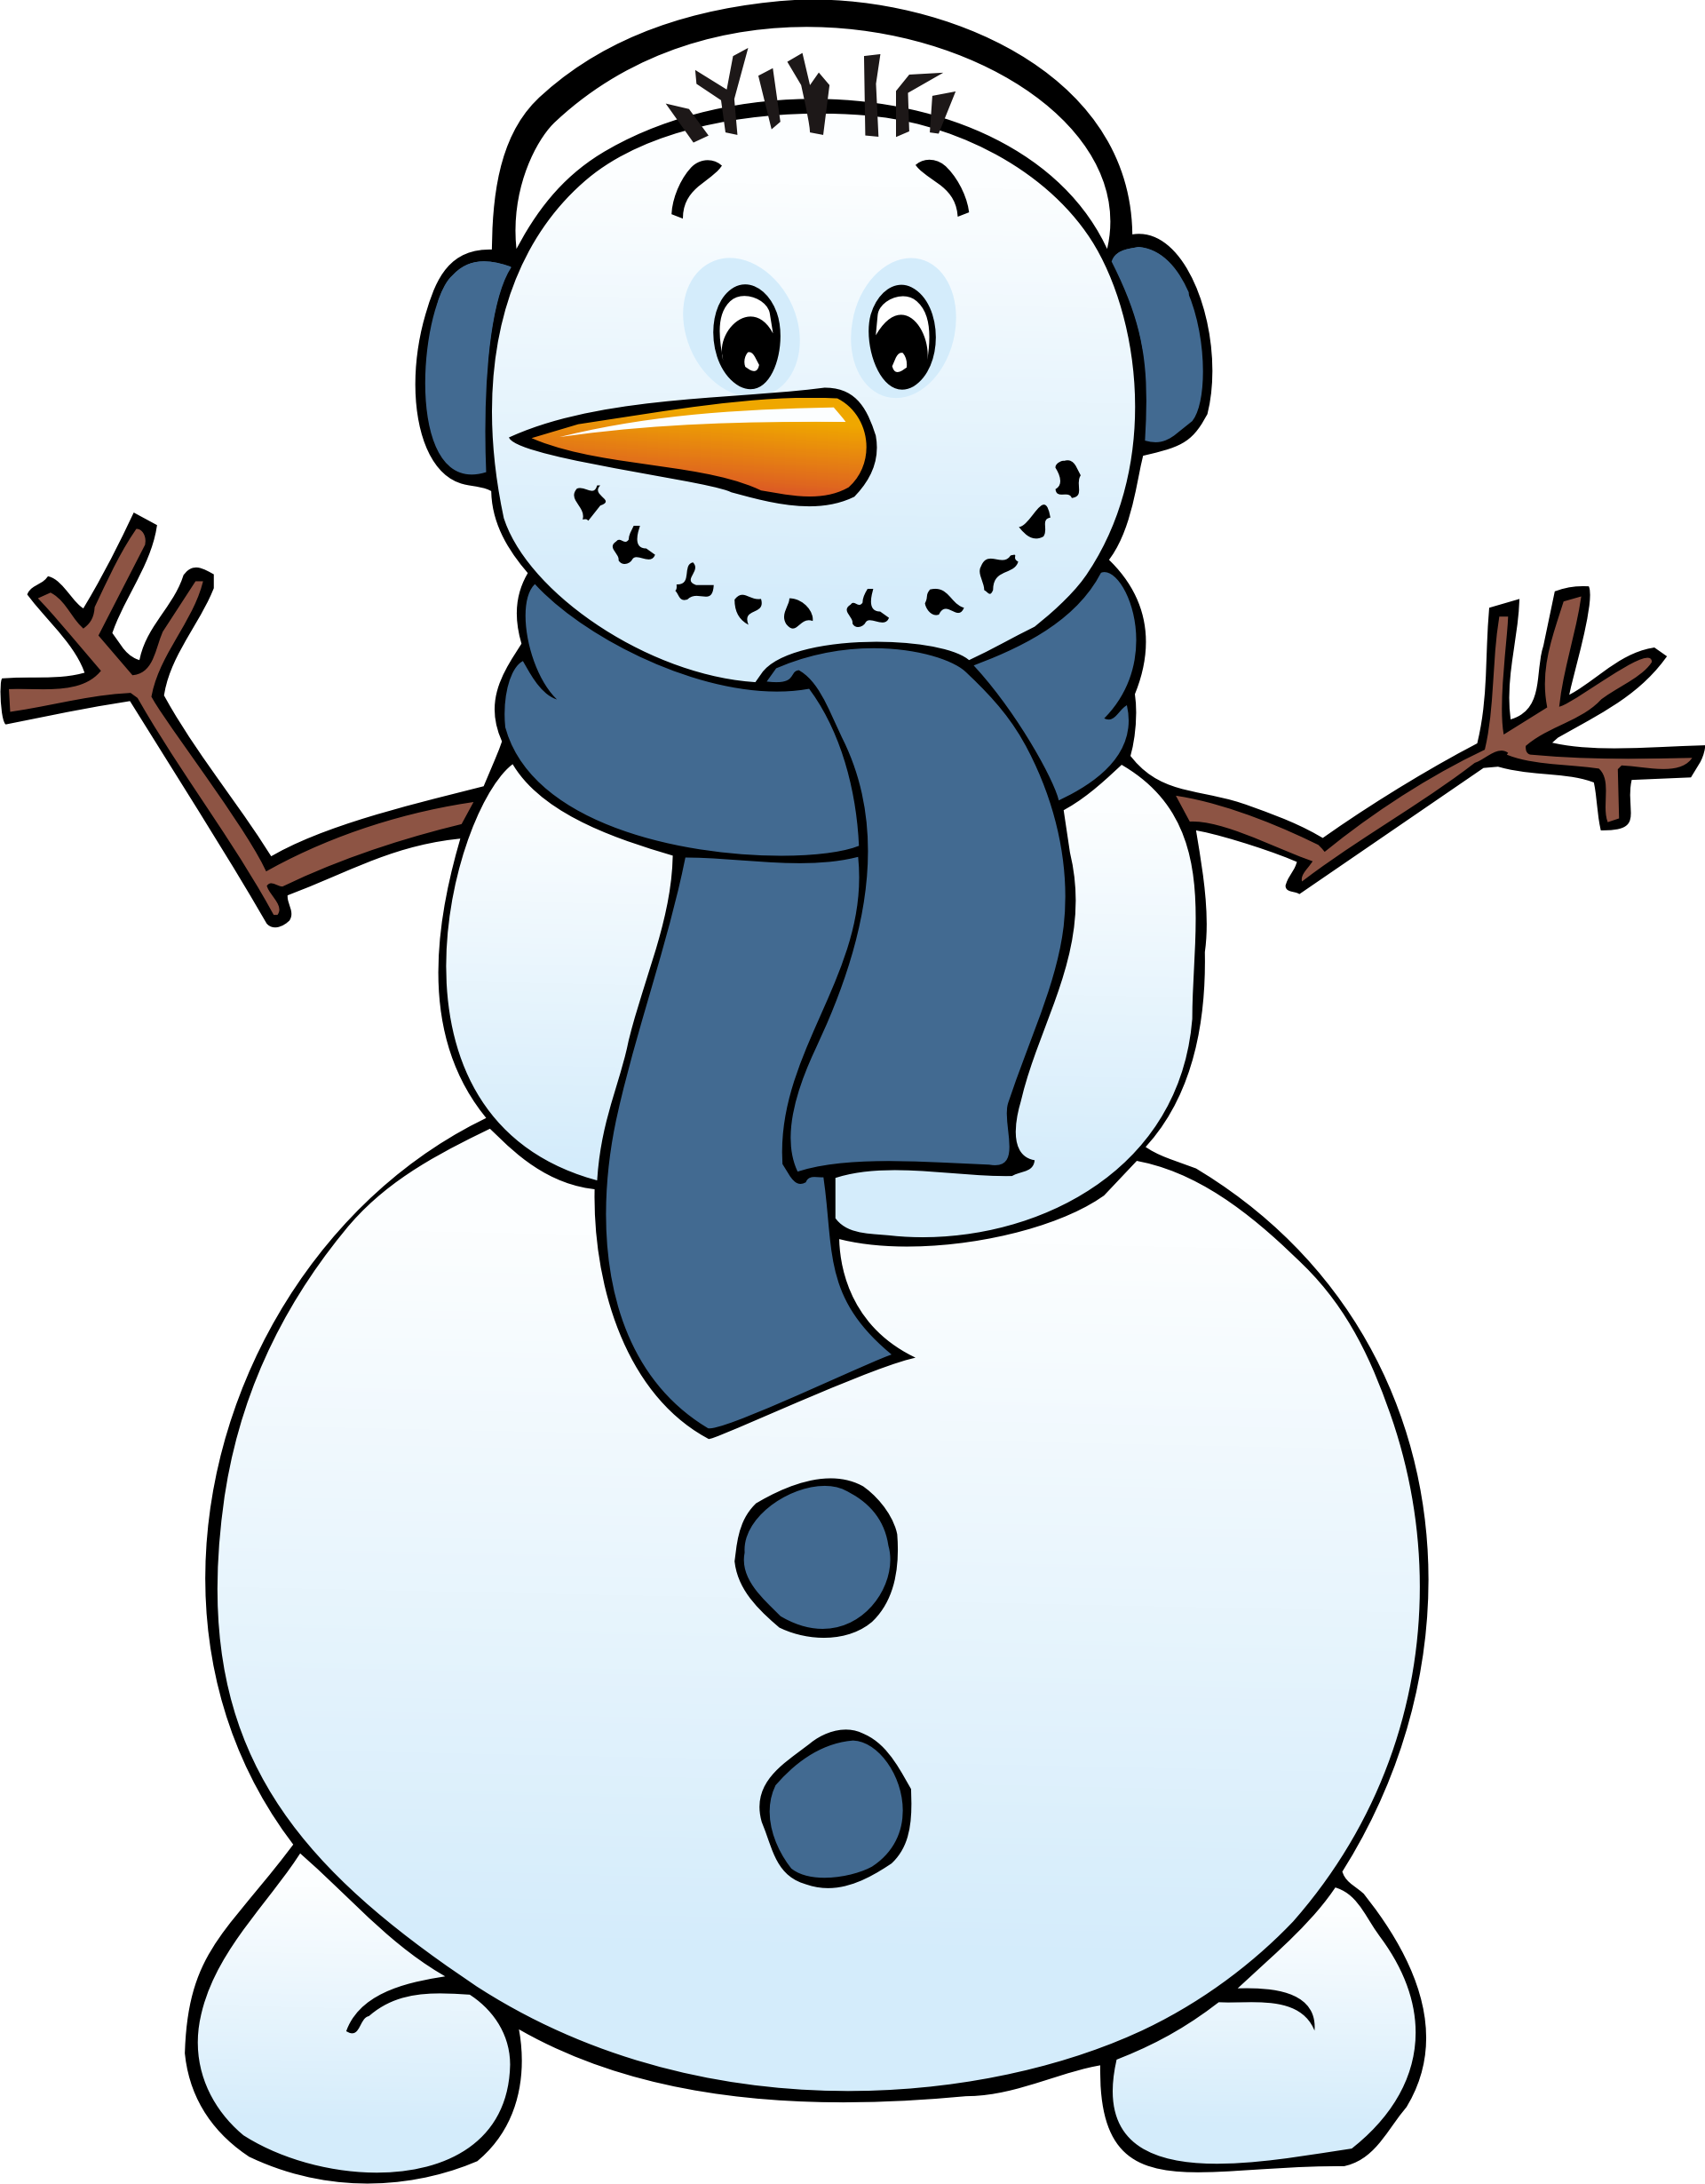 1000+ images about Snow peeps ;)